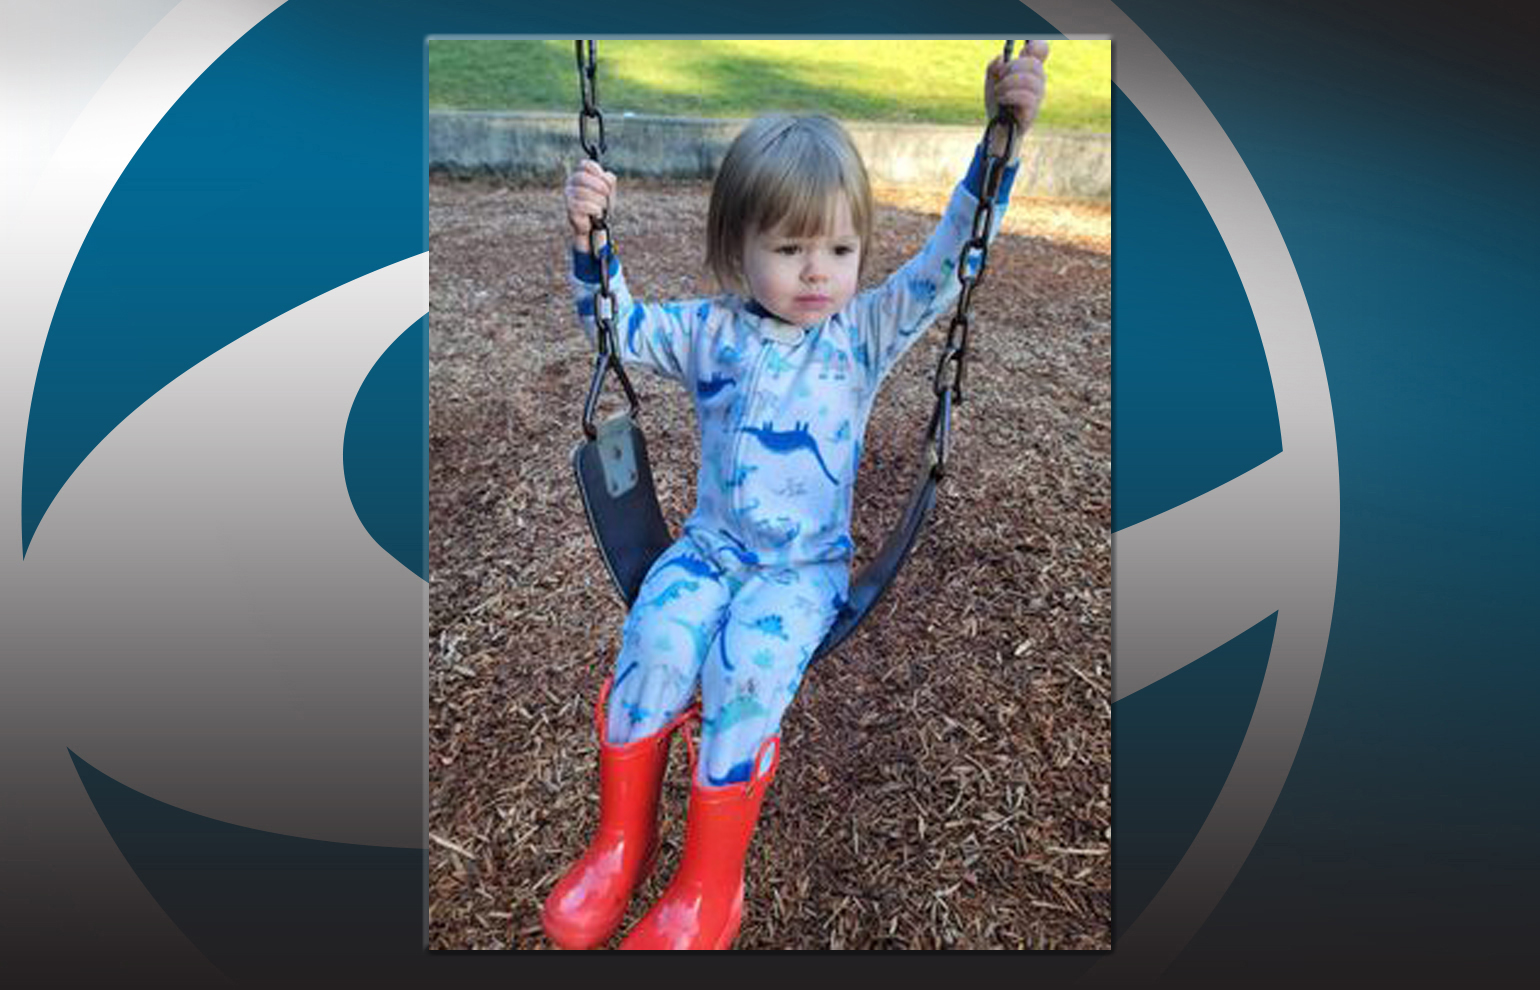 Georgia Paige Jones, a 2-year-old Battle Ground girl, drowned Saturday evening at Lewisville Regional Park.